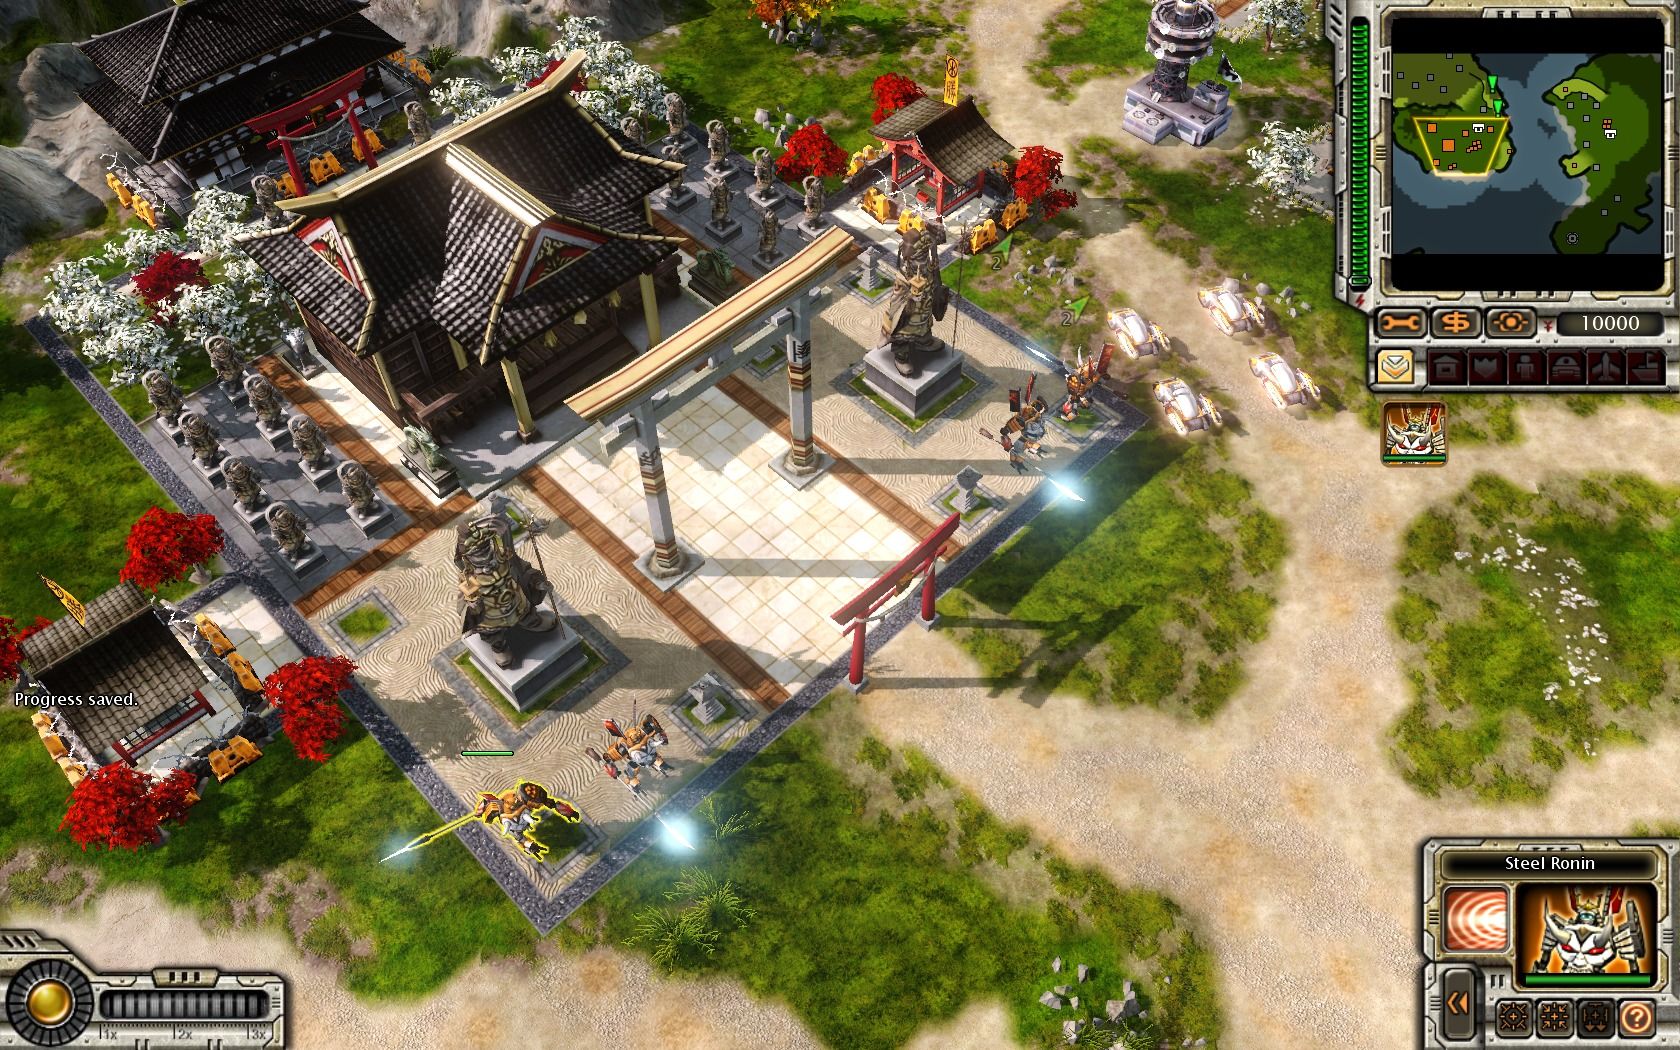 Buy Command & Conquer: Red Alert 3 - Uprising cheap, from different sellers with different payment methods. Instant delivery.